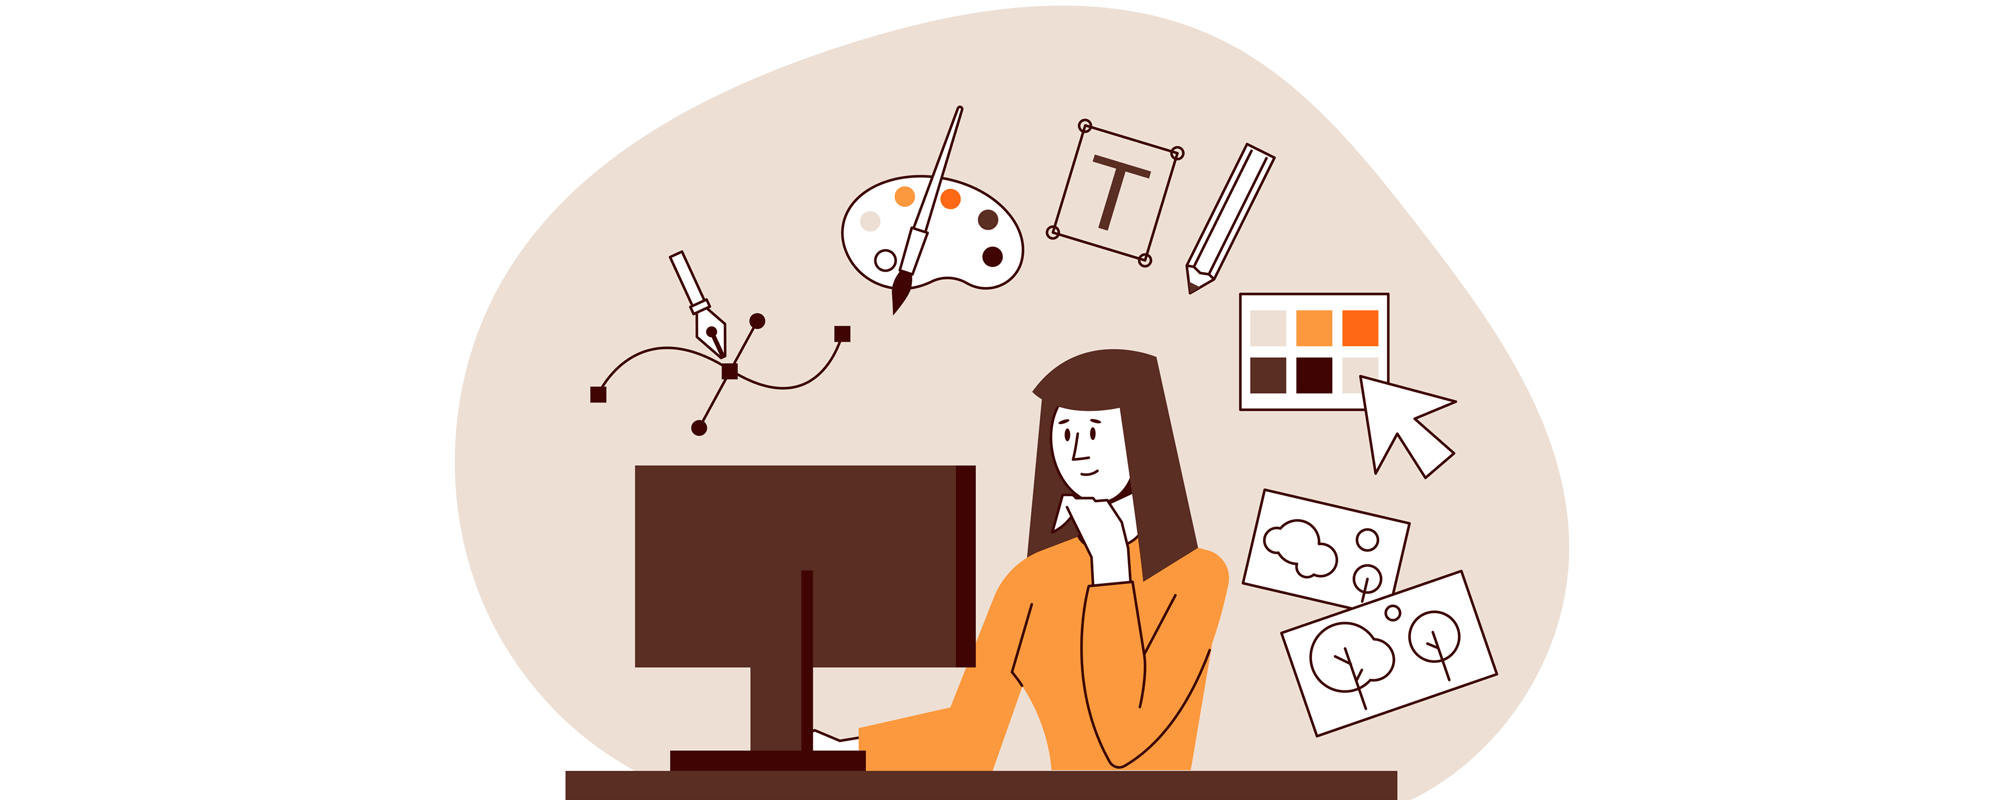 Infographic of lady at a computer